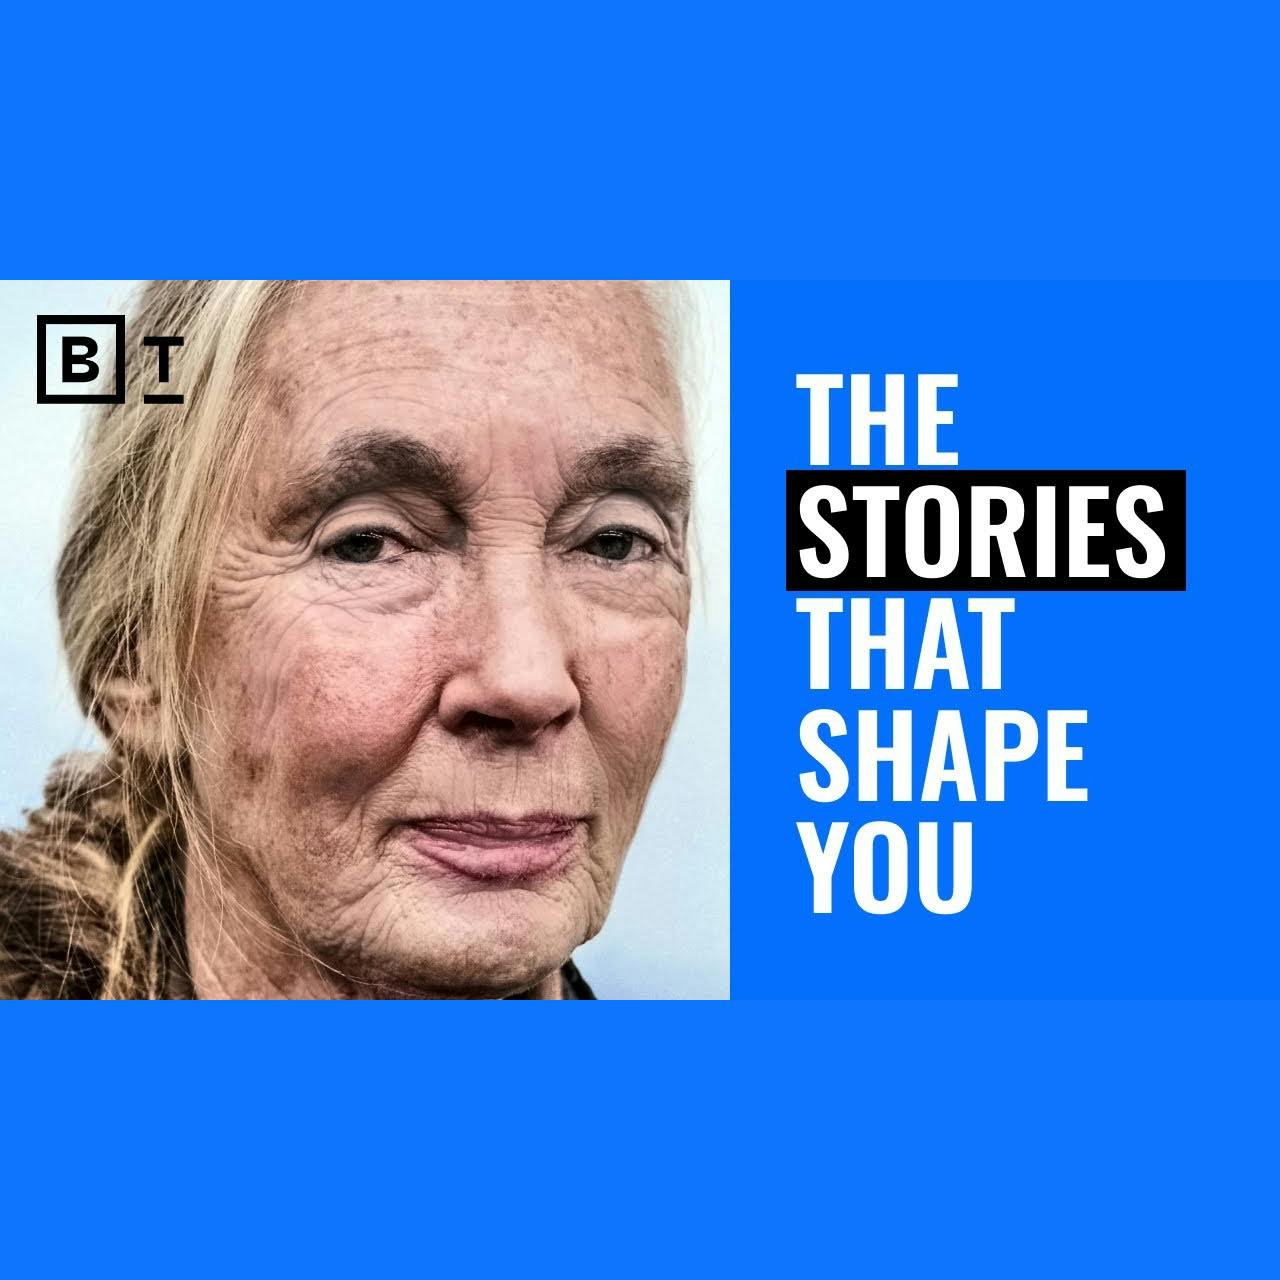 How to tell stories that give you meaning | Jane Goodall, Terry Crews & Dan McAdams